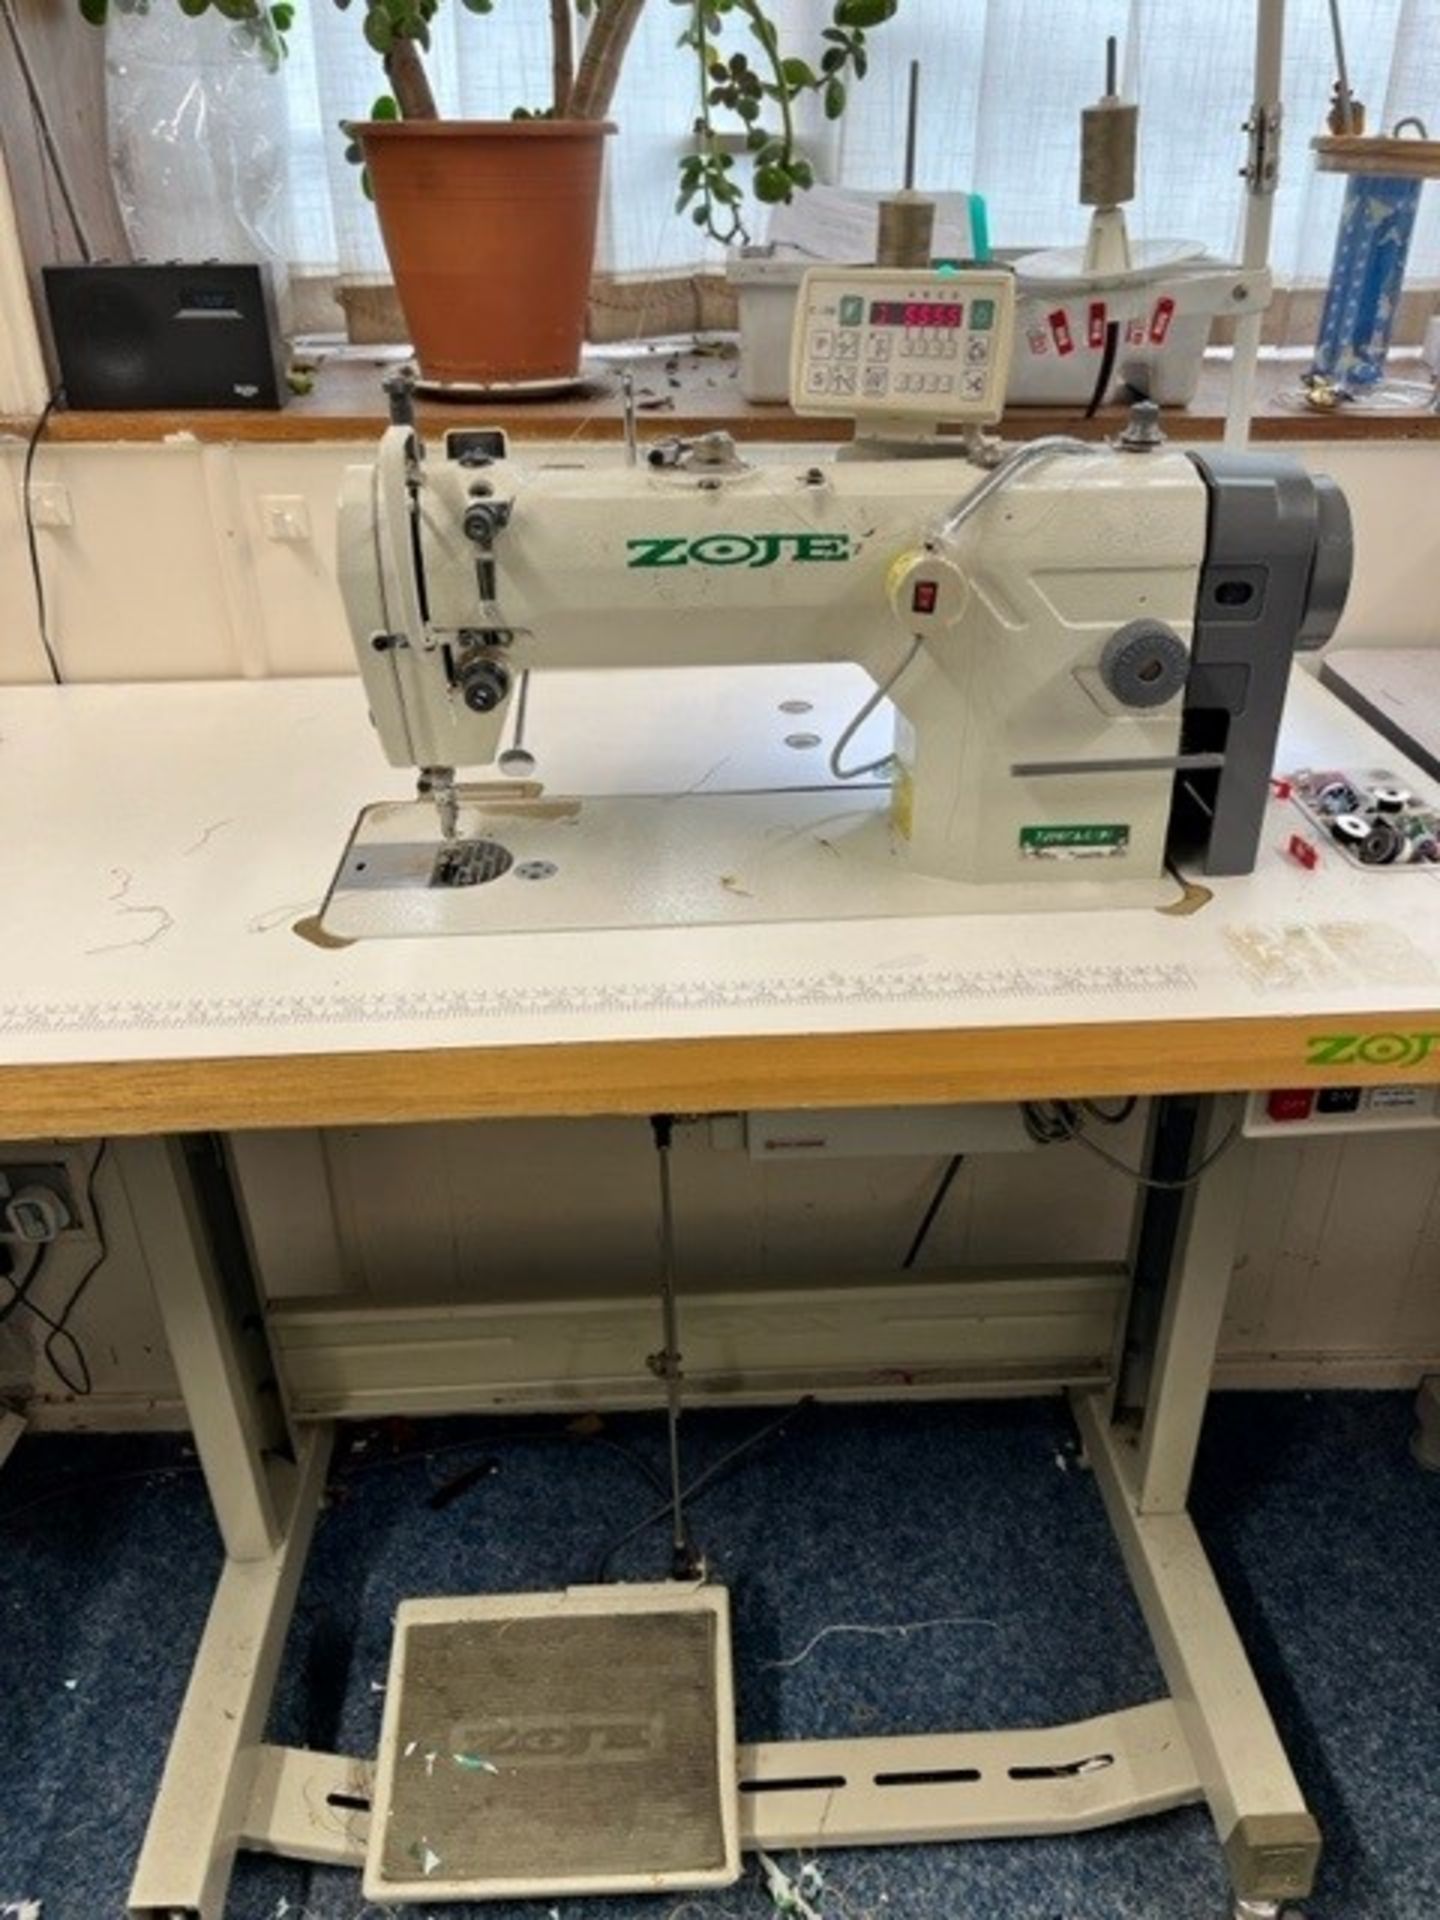 No VAT  Zoje computerised industrial sewing machine, was working up to the closure of the sewing